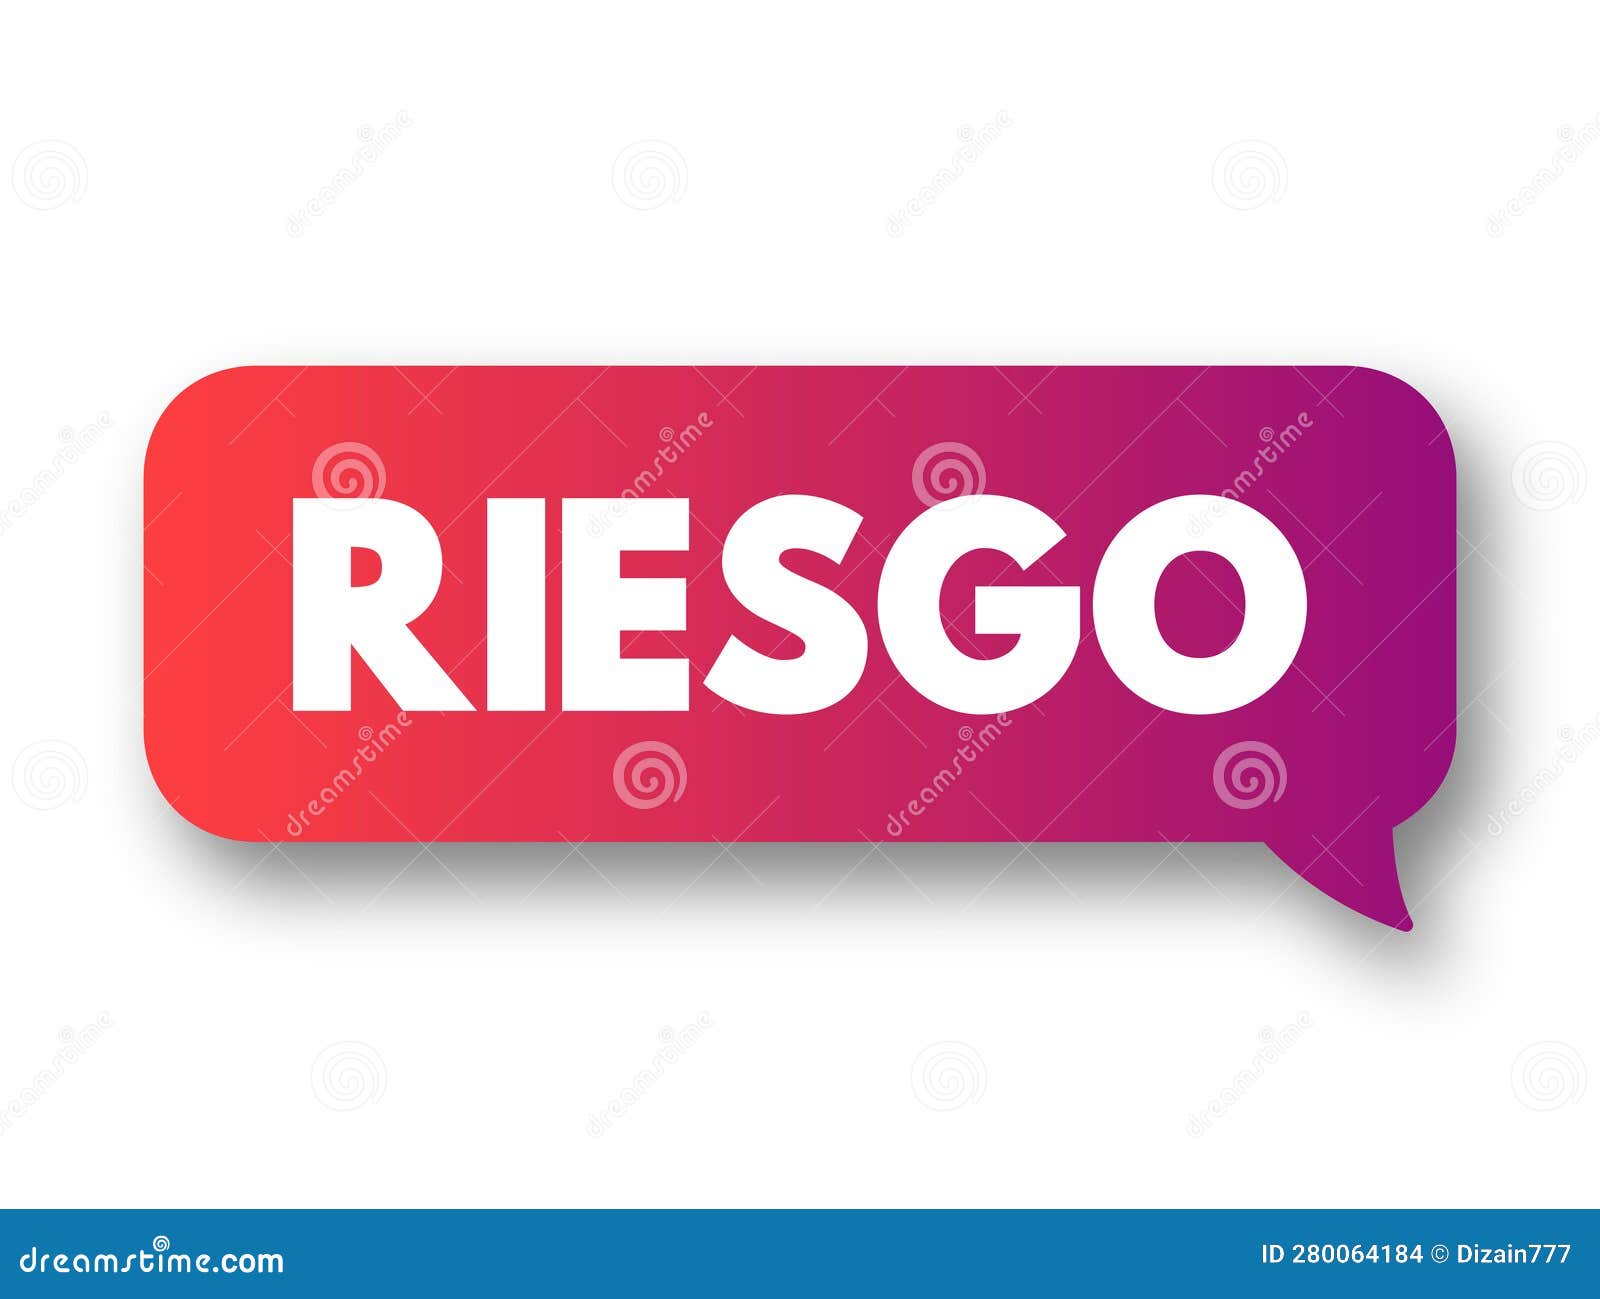 riesgo (spanish words for risk) text quote message bubble, concept background